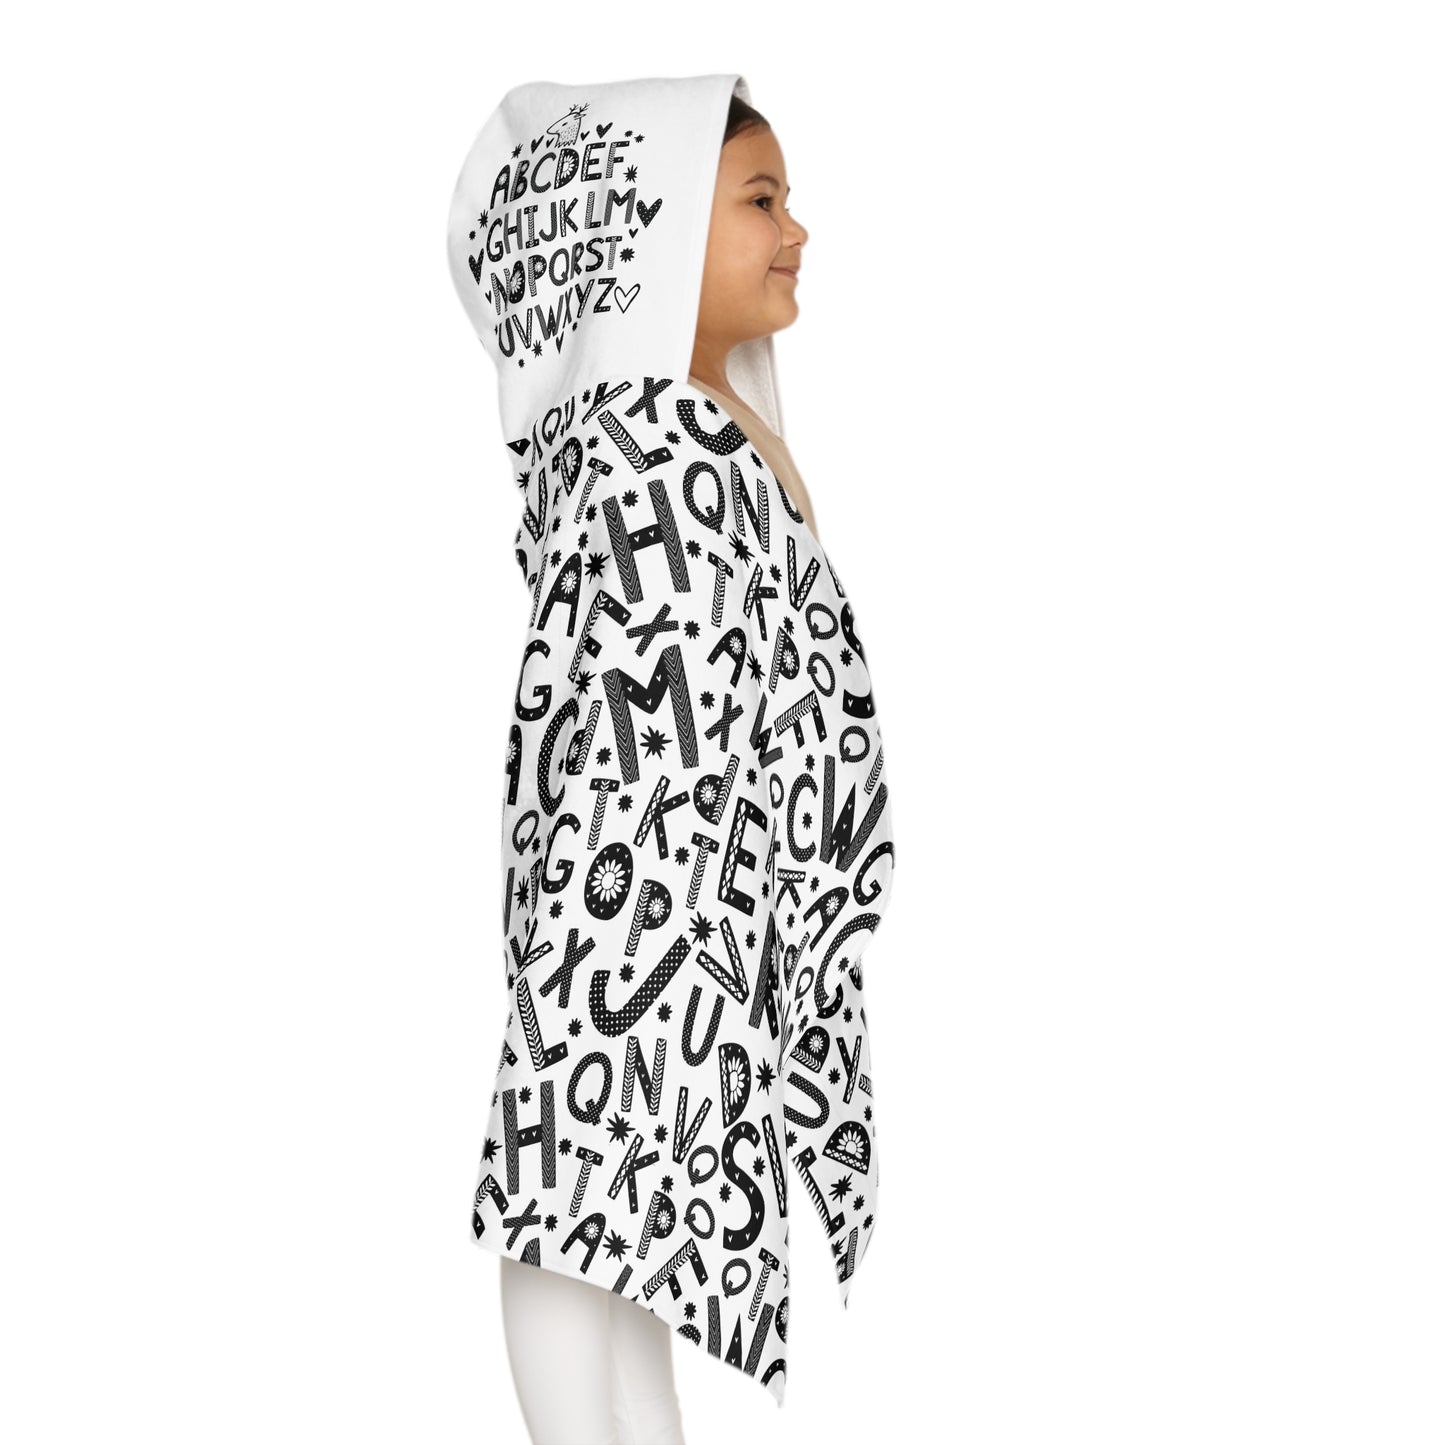 Niccie's Adorable ABC Pattern Youth Hooded Towel - Kids Bathrobe